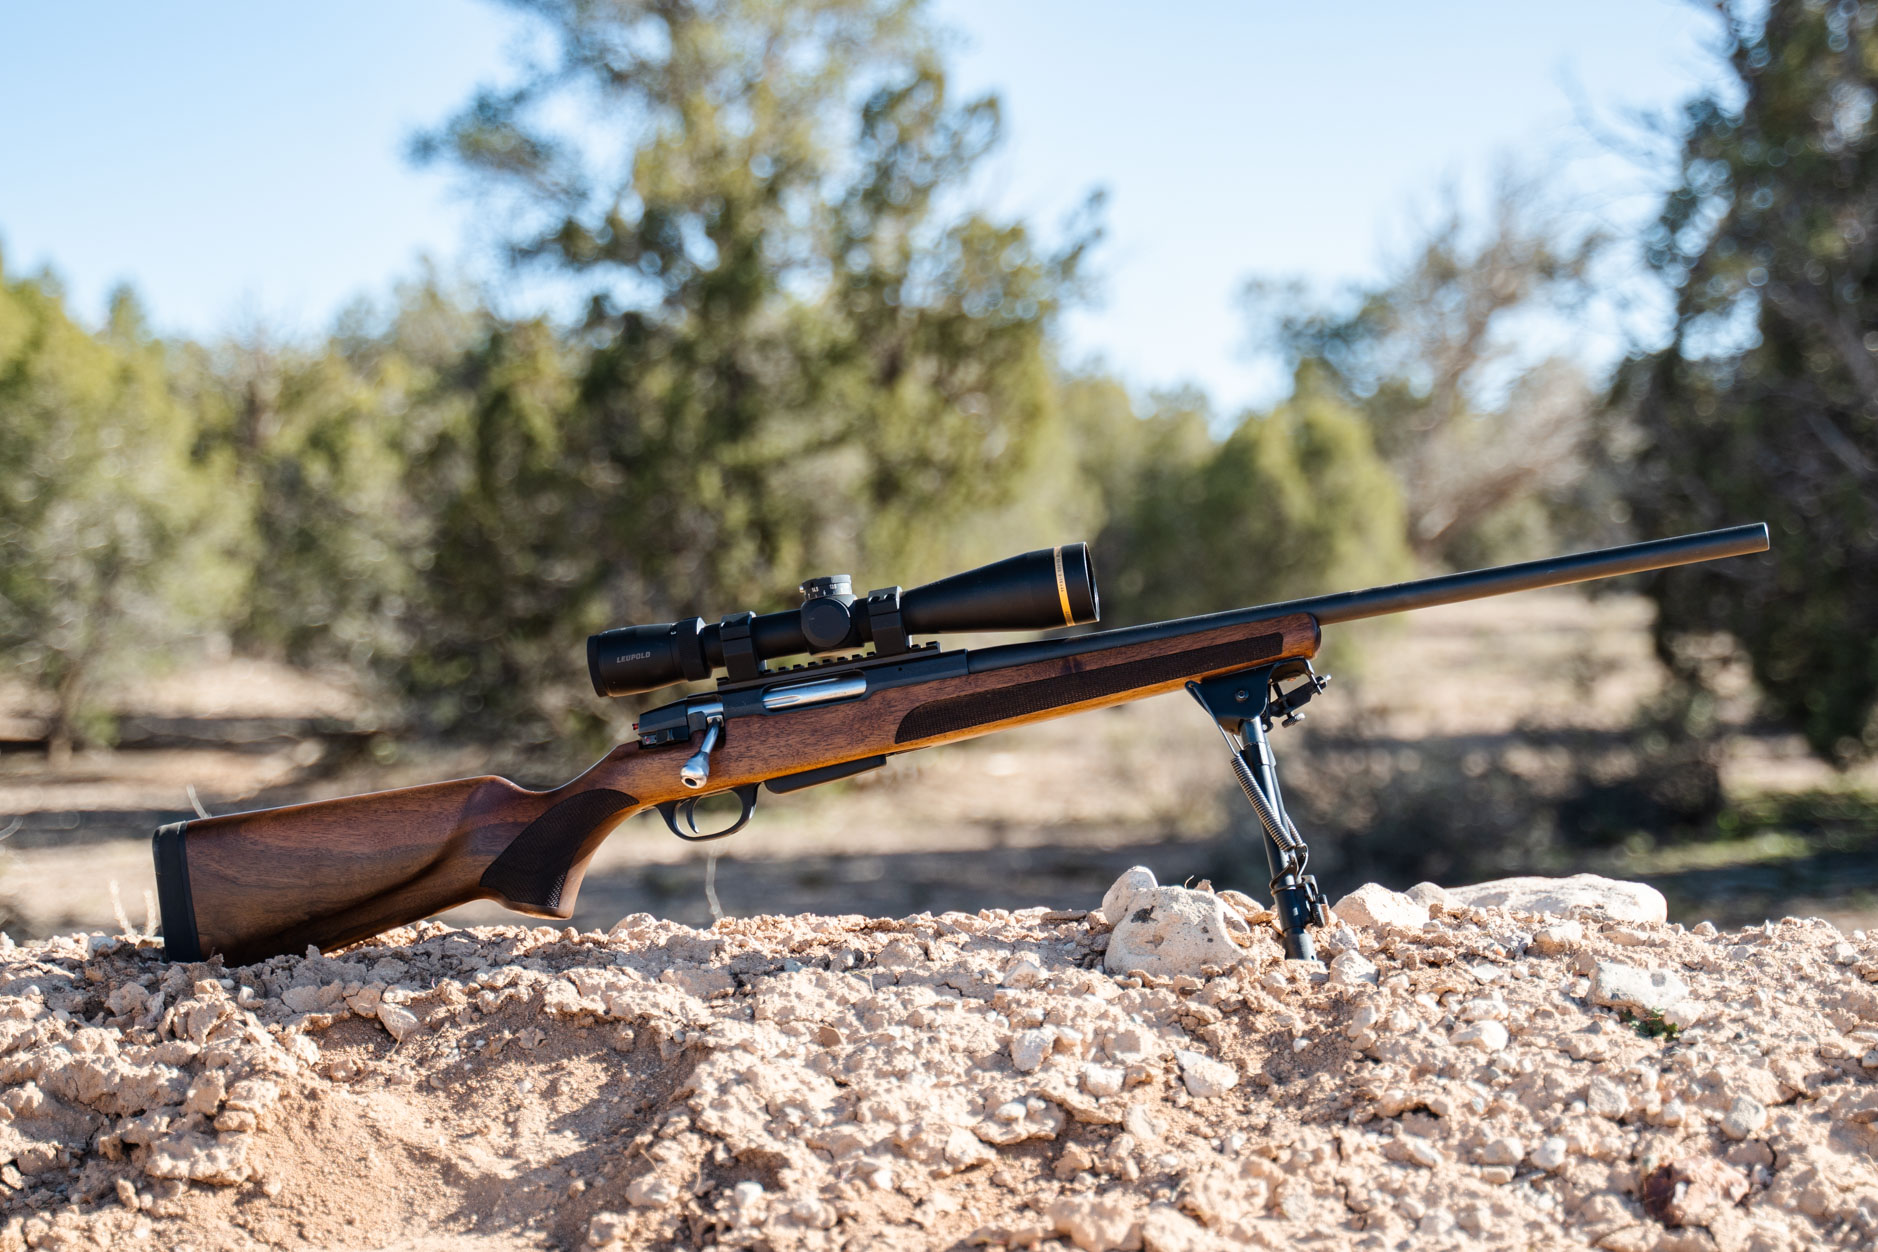 Stevens 334 Walnut was one of the best budget rifles of the test